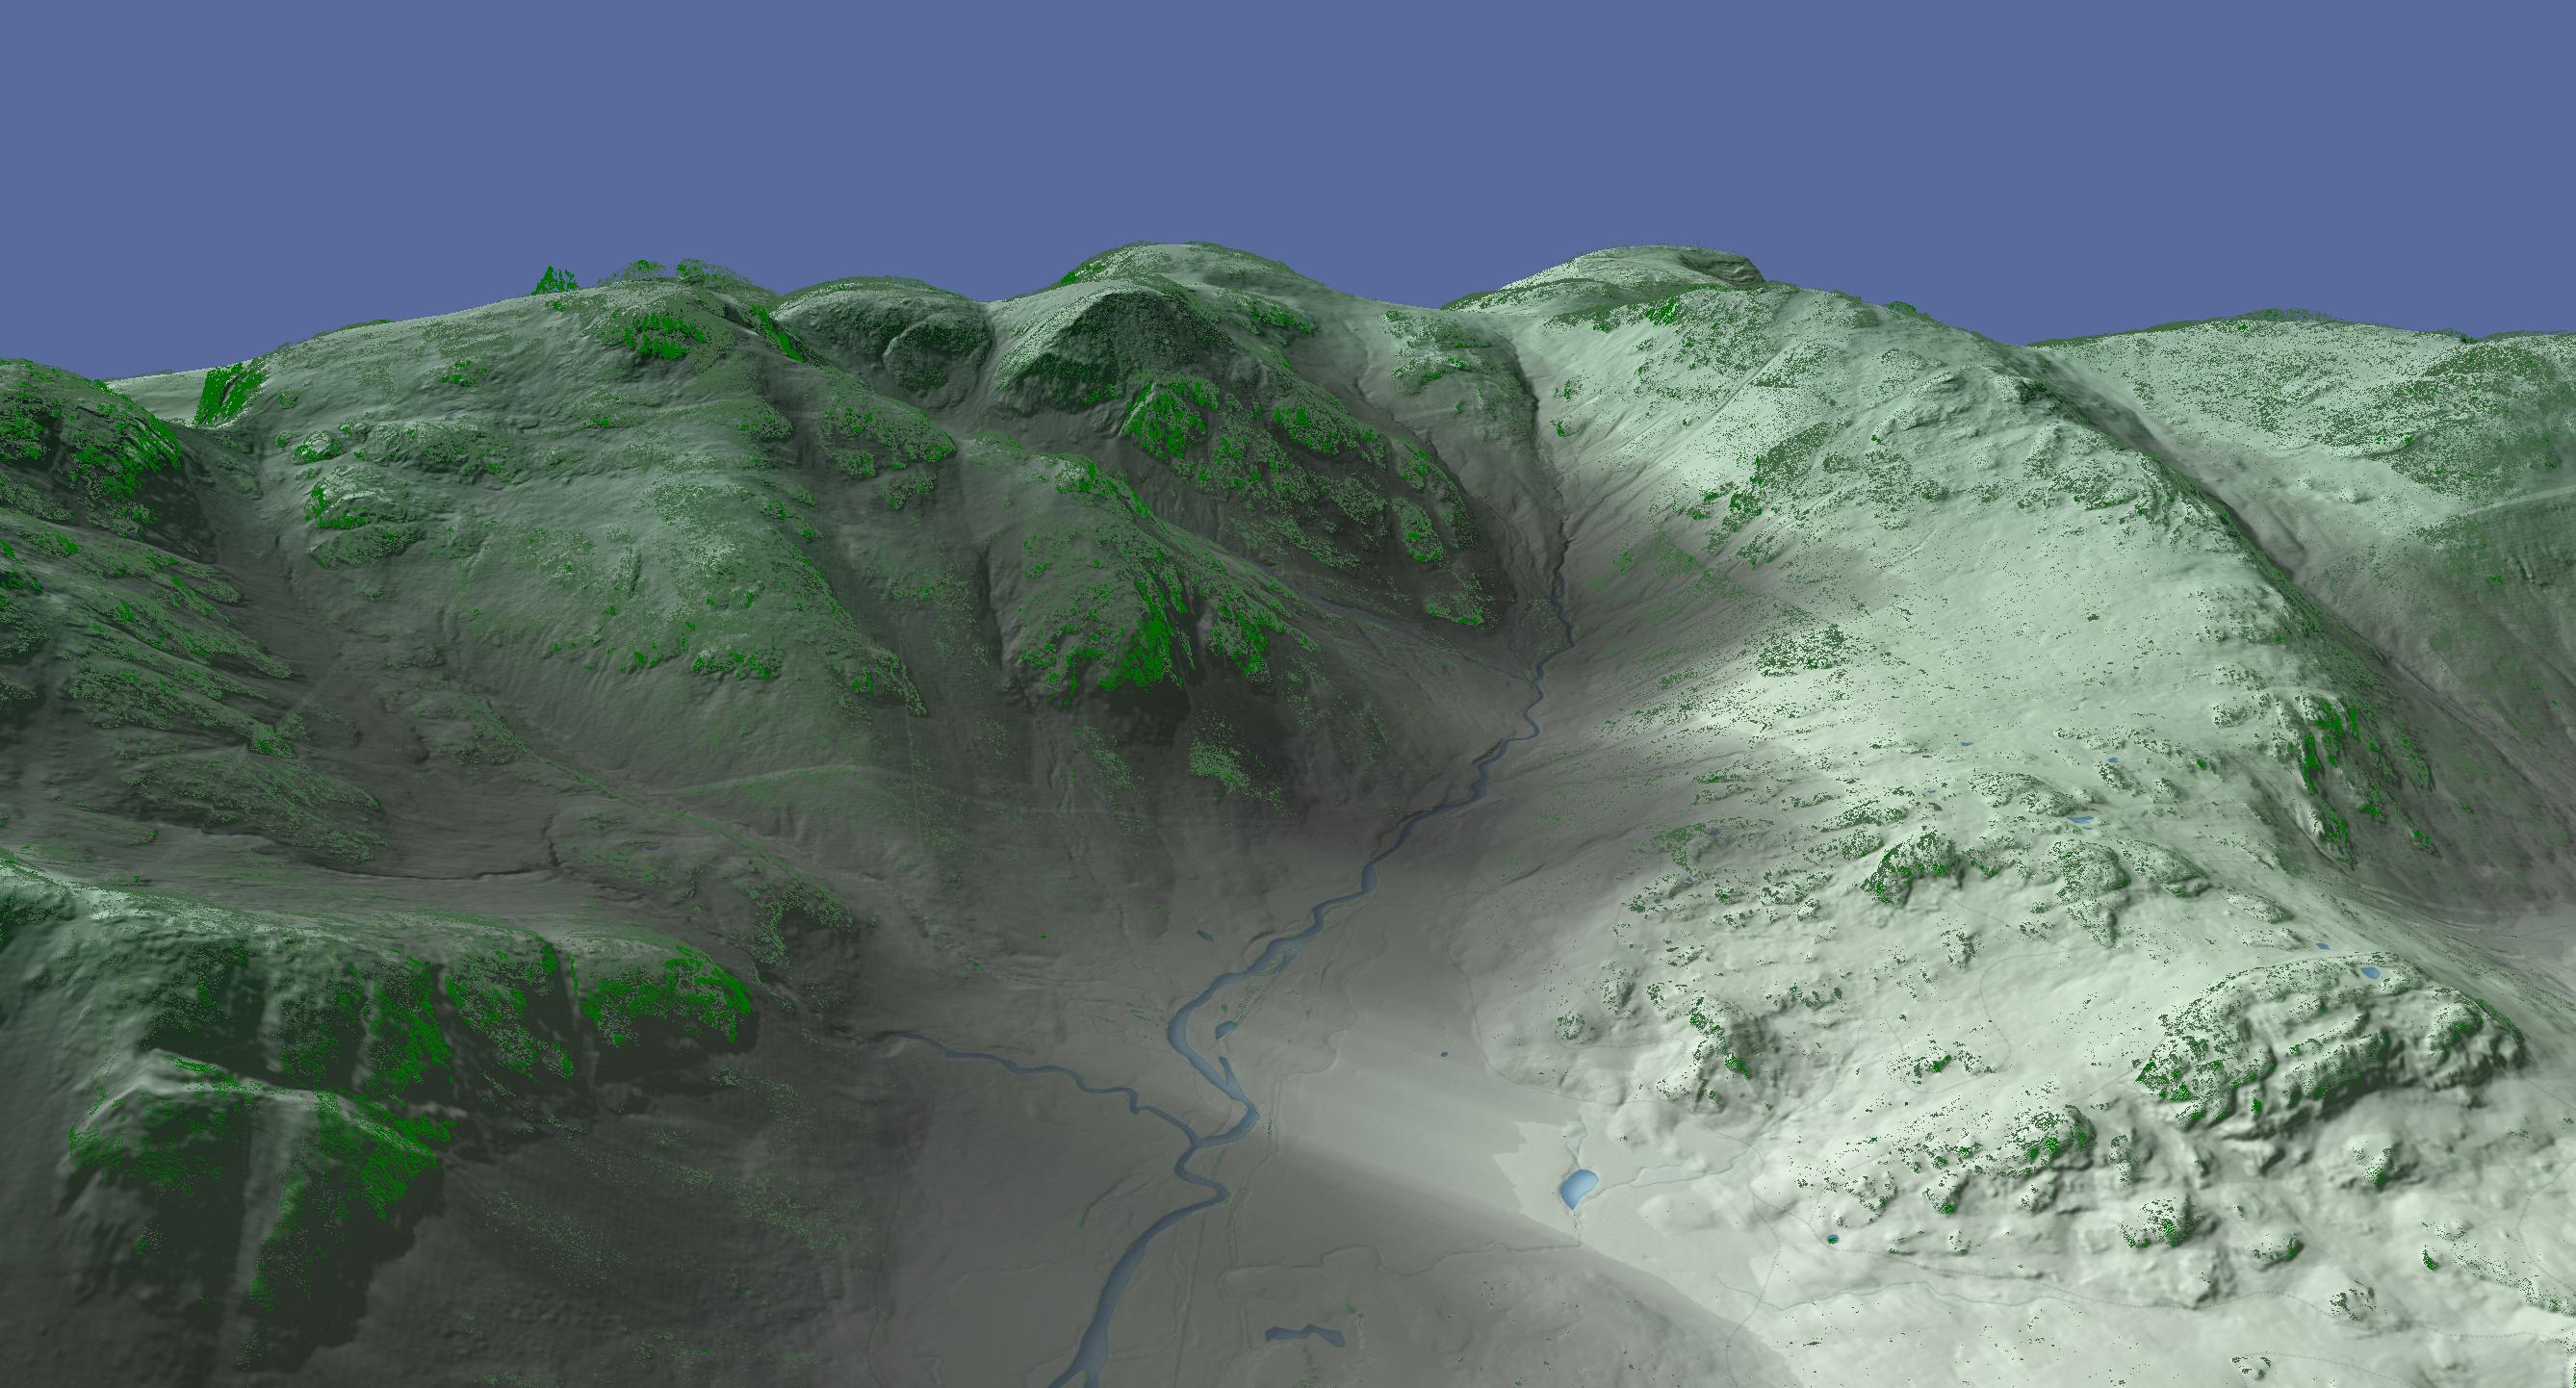 Raster shadow, point clouds and 3d enhancement. Data: Defra and OS